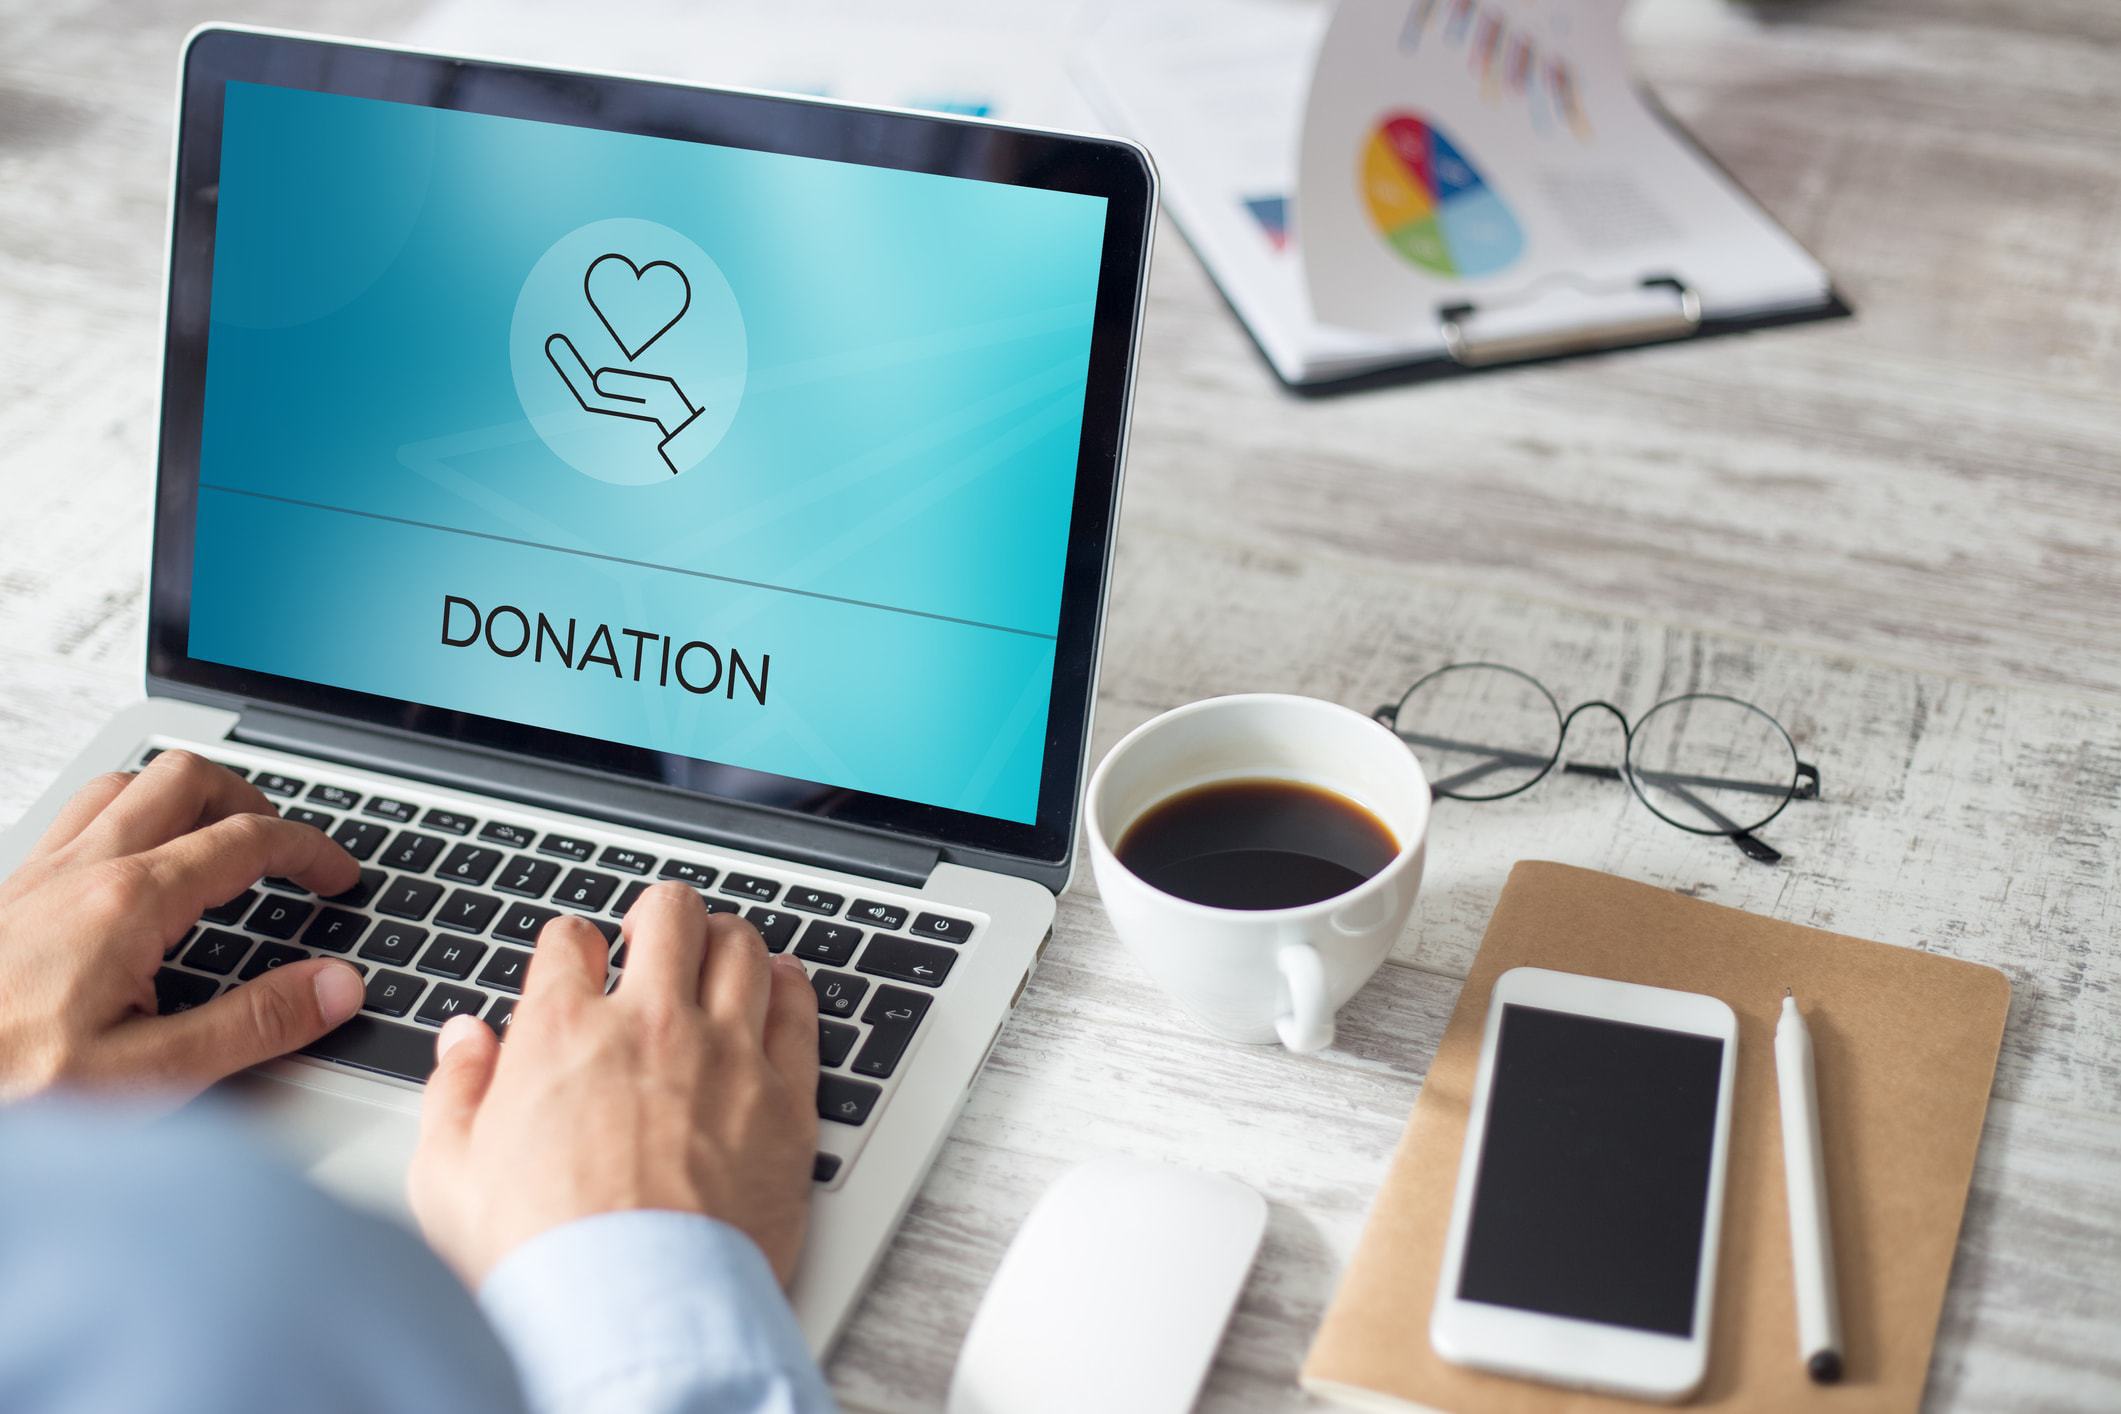 Computer screen shows the work donations with a heart icon